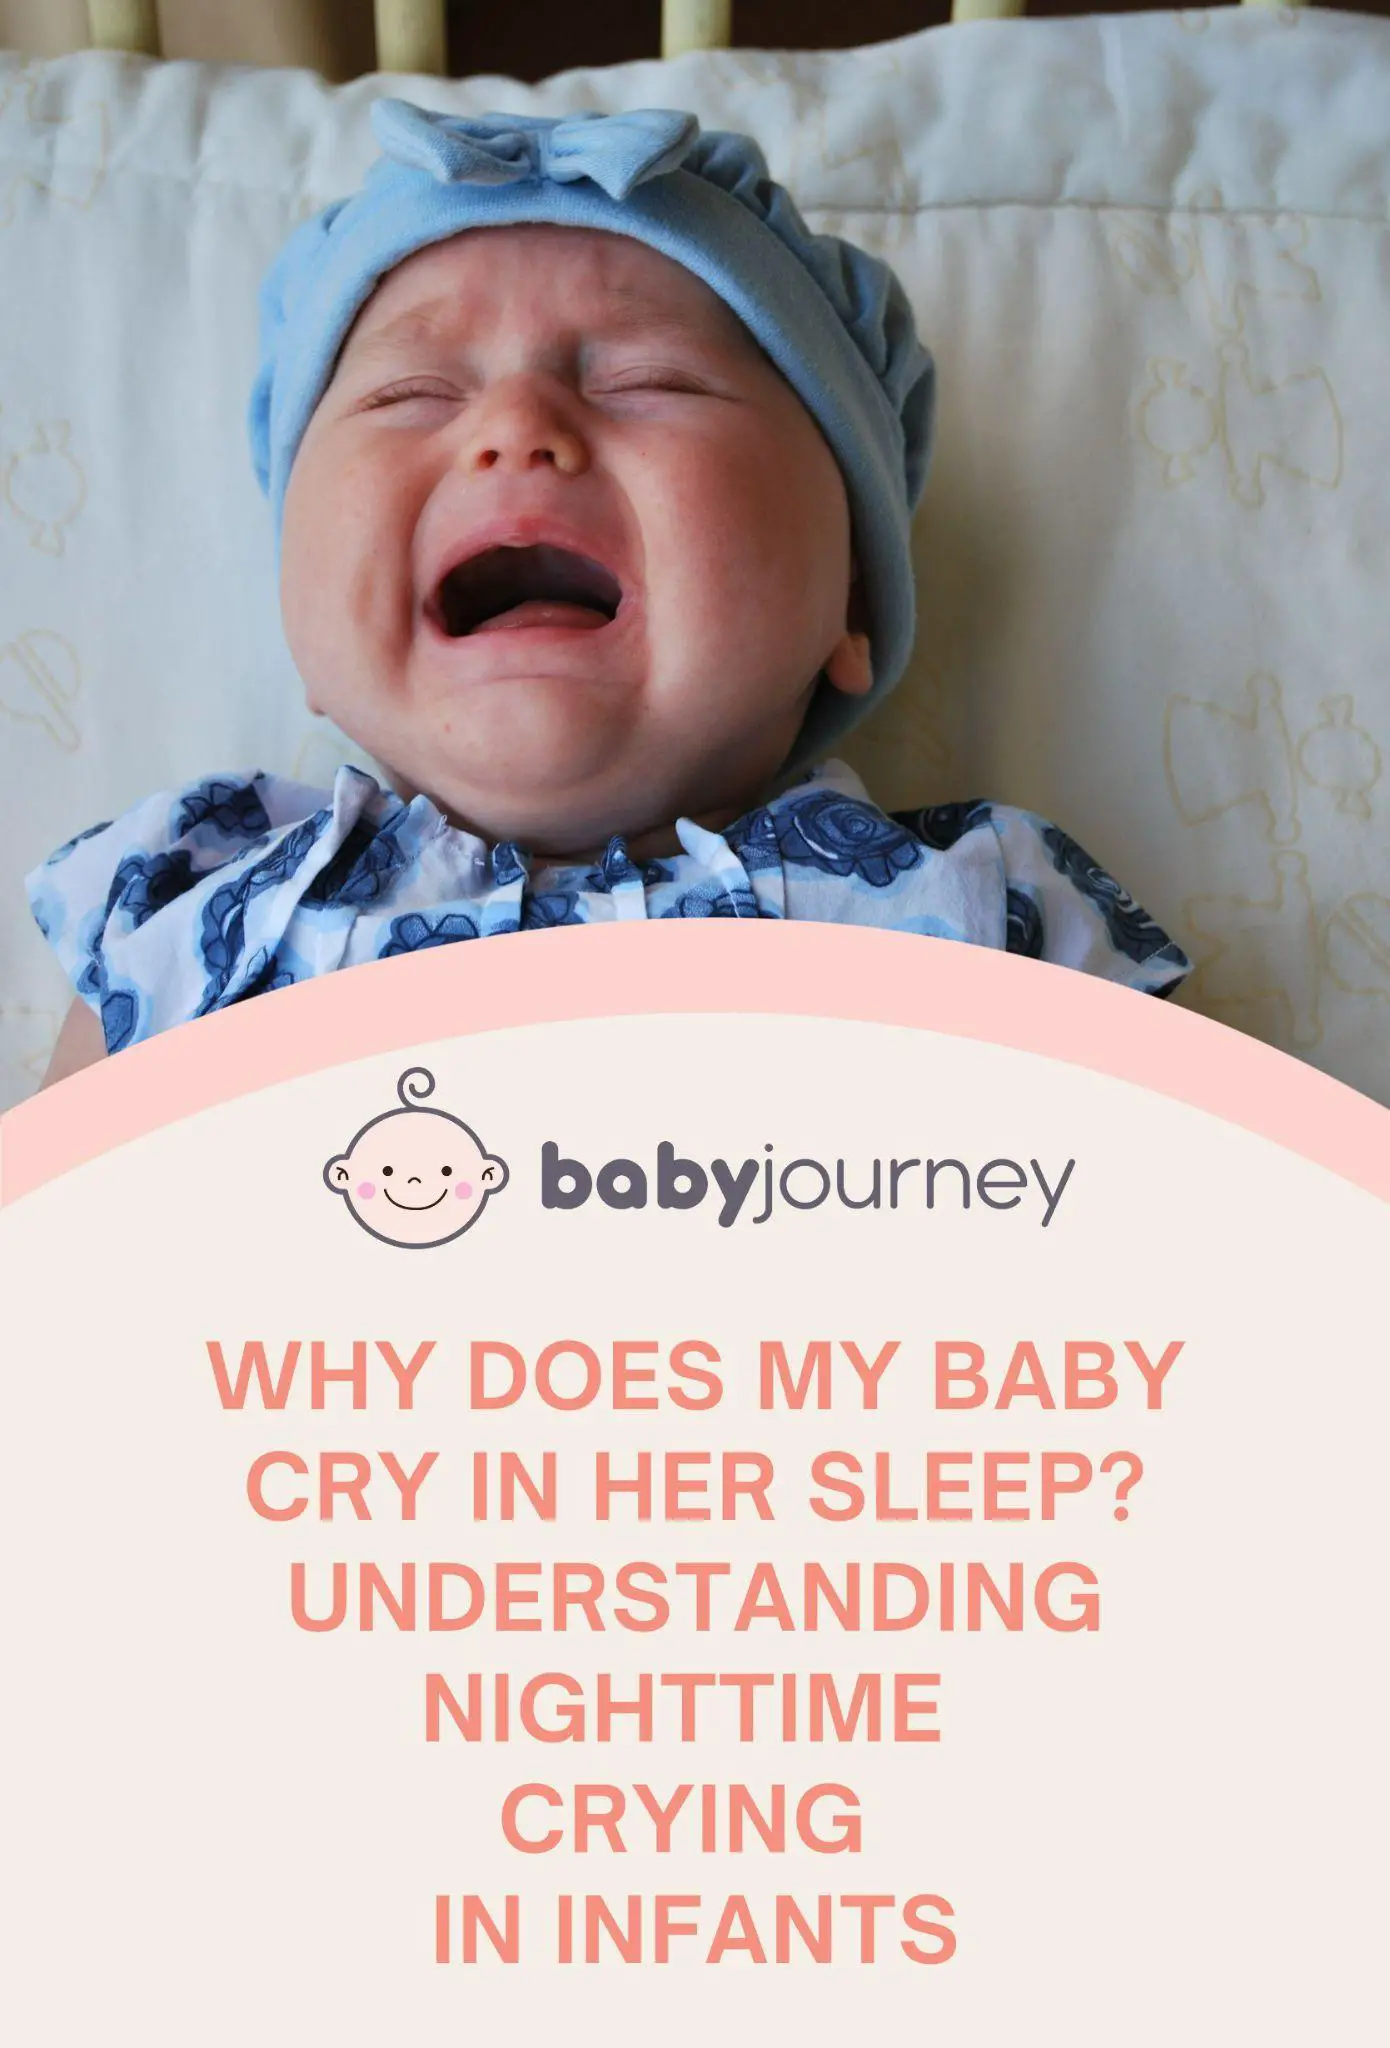  Why Does My Baby Cry in Her Sleep? Understanding Nighttime Crying in Infants Pinterest Image - Baby Journey